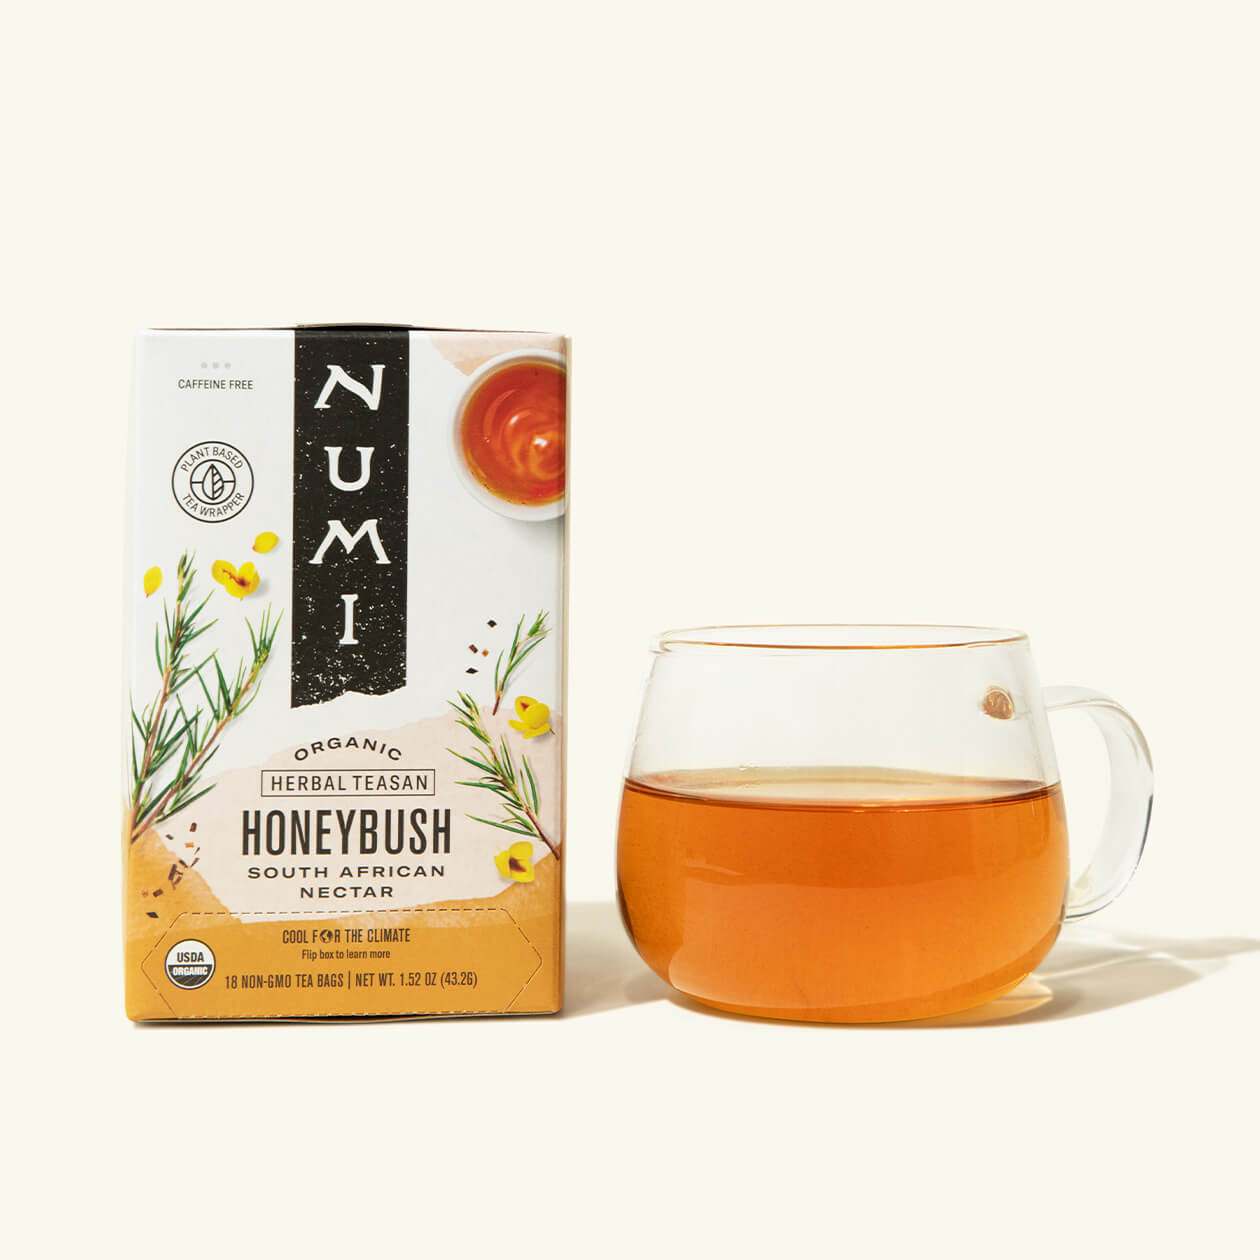 A box of Numi's Honeybush next to a brewed cup of tea in a clear cup